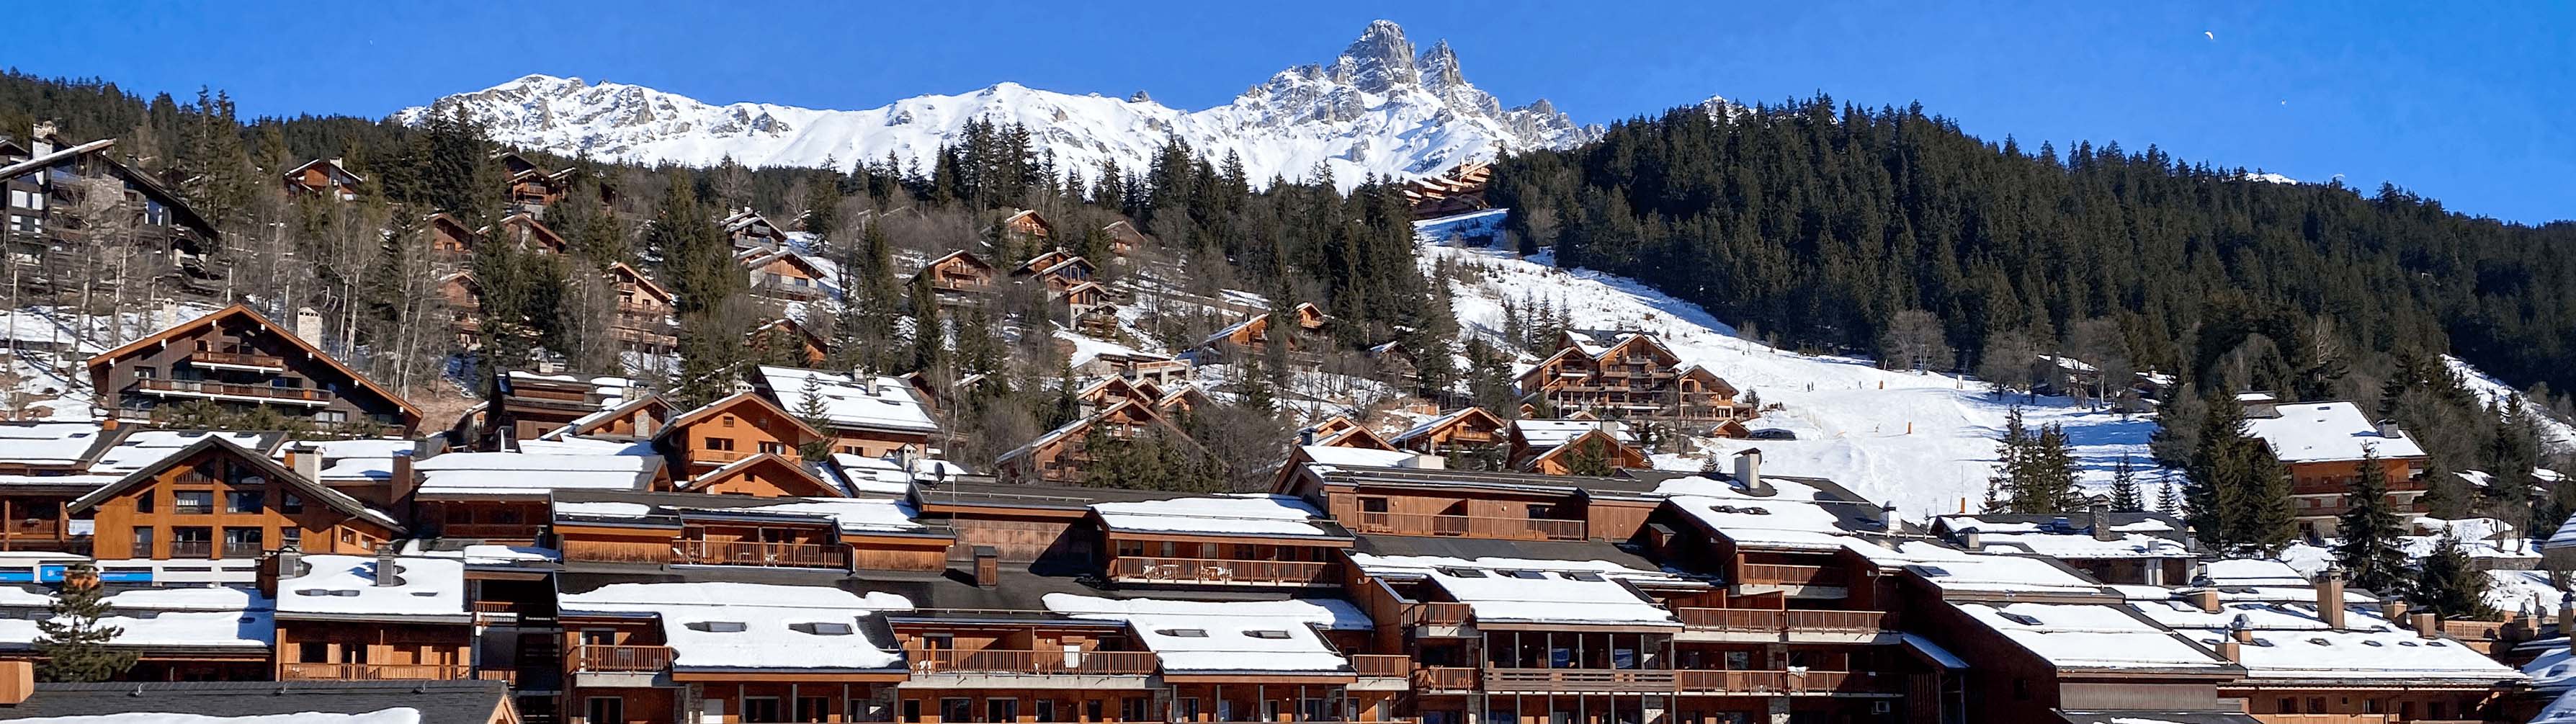 Brown chalets in Meribel stand before snow-packed slopes on a clear and sunny day.